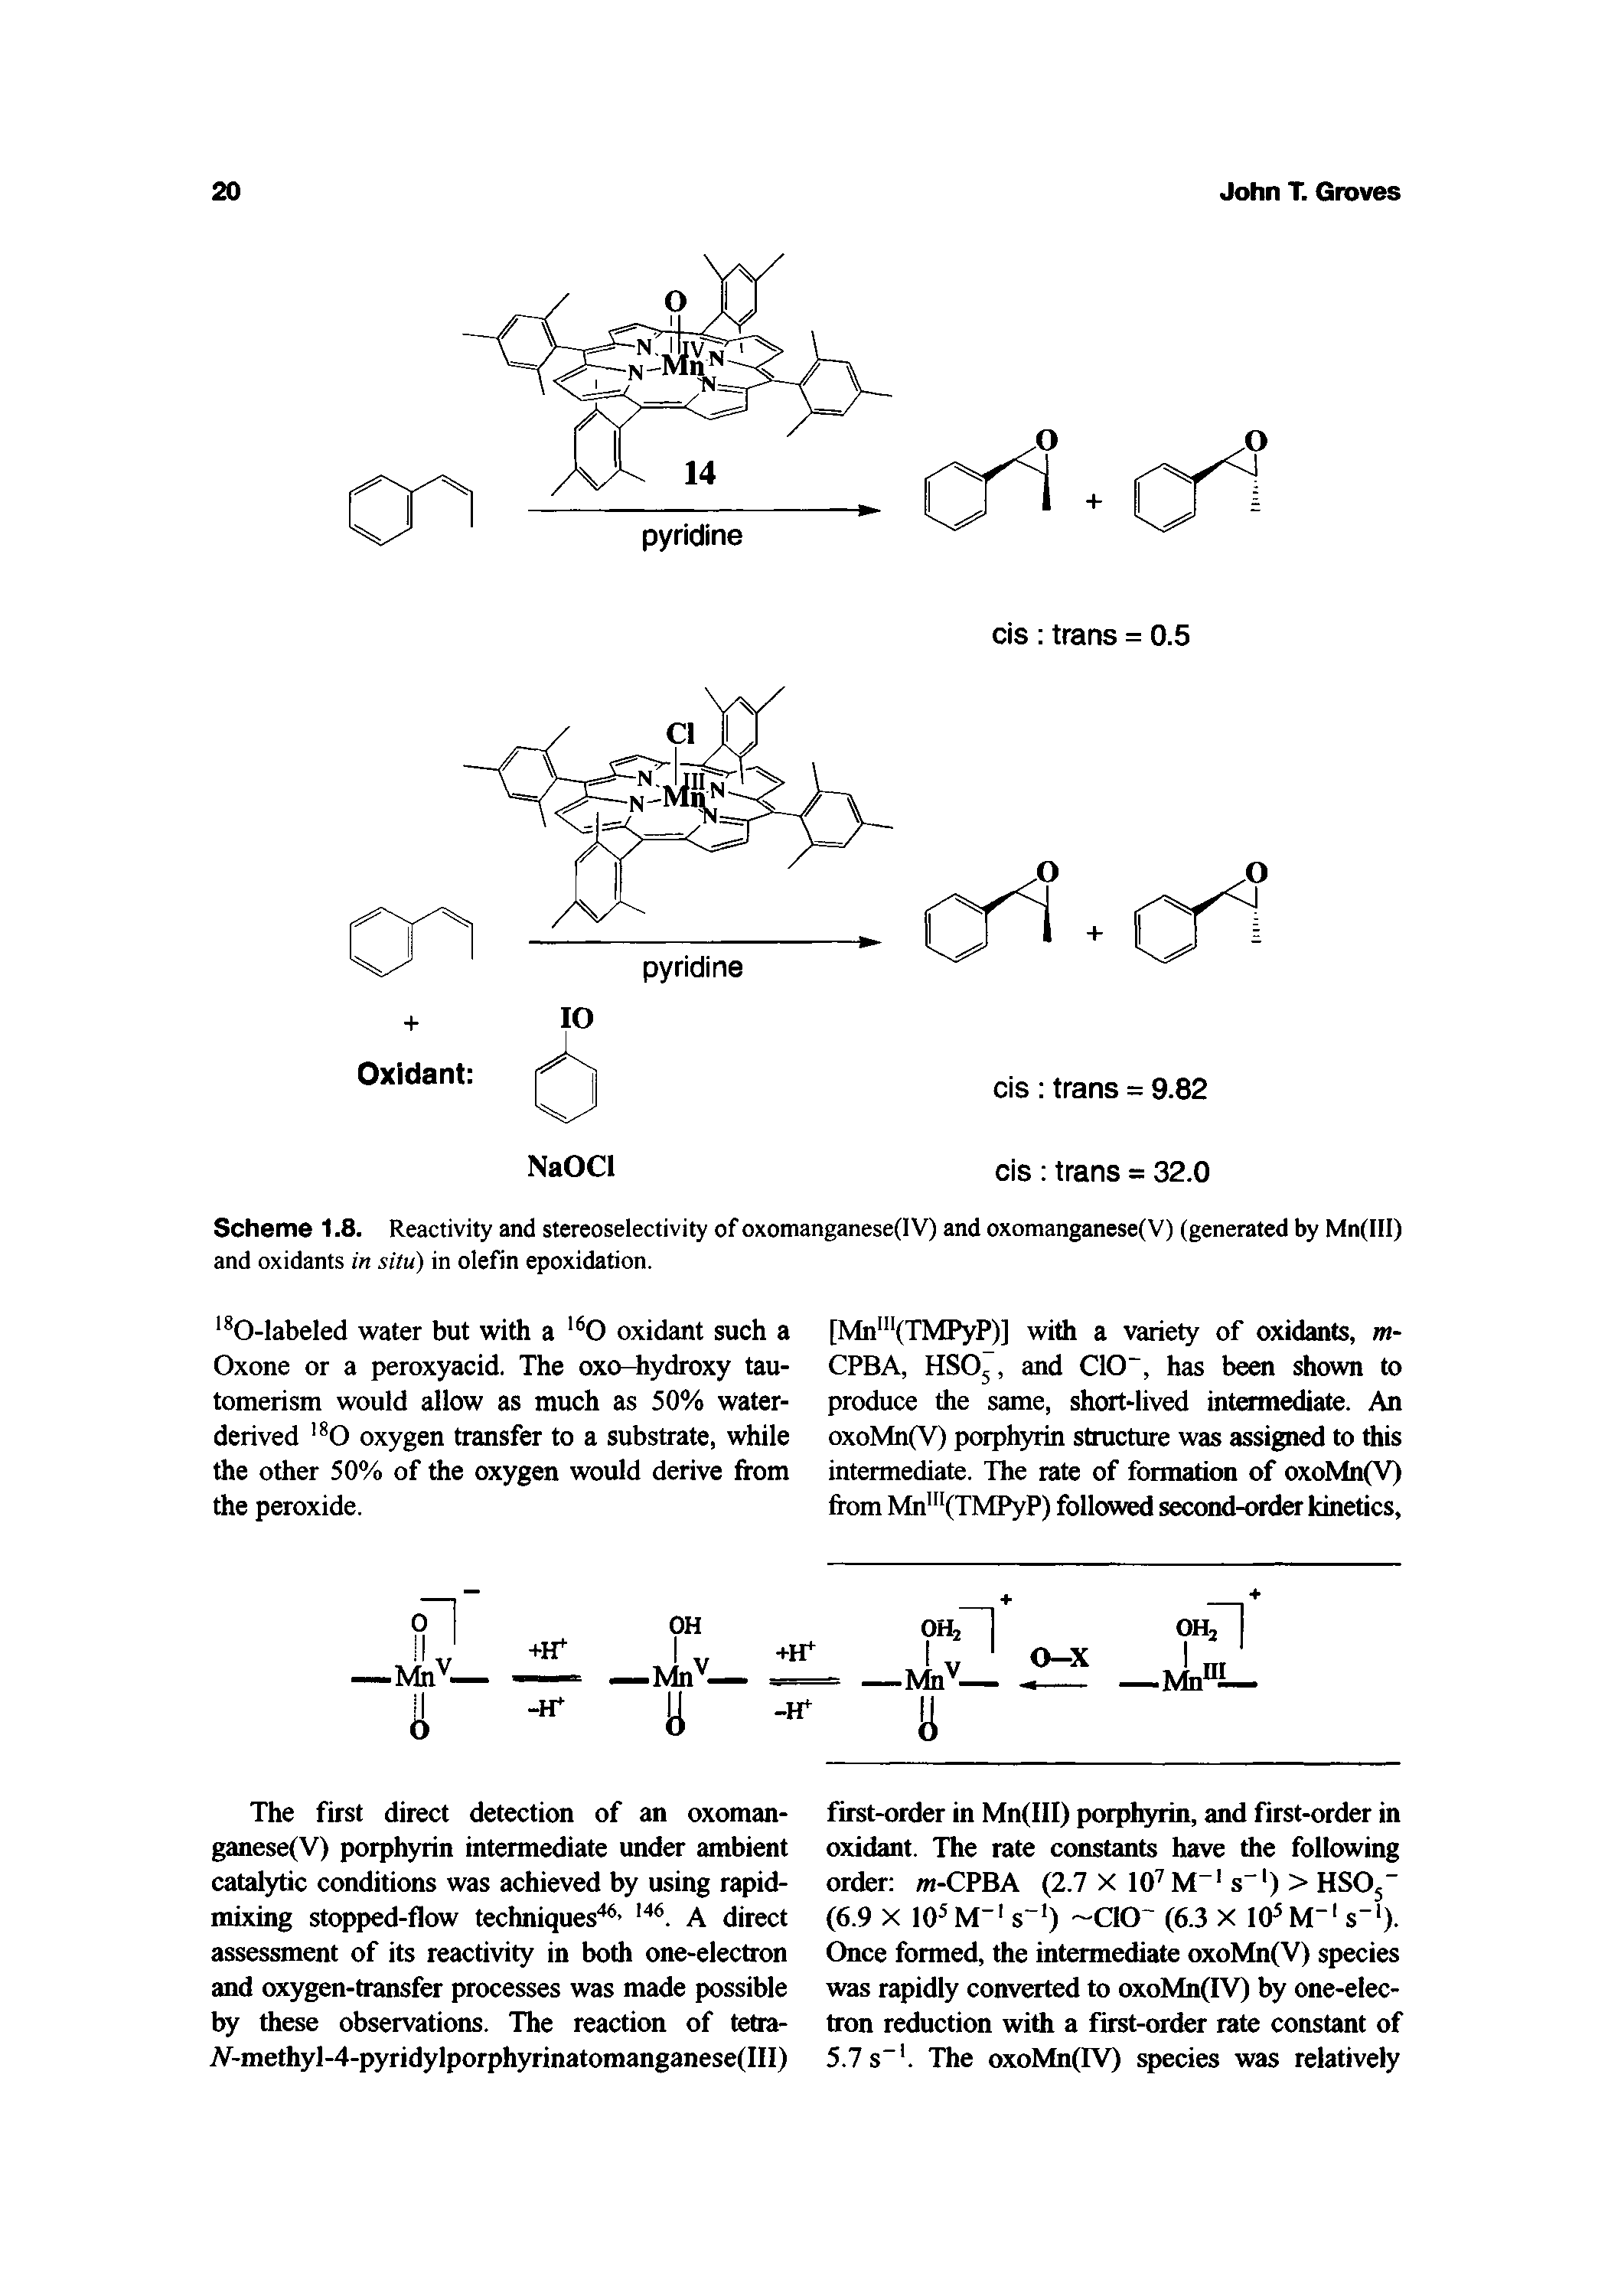 Scheme 1.8. Reactivity and stereoselectivity of oxomanganese(IV) and oxomanganese(V) (generated by Mn(III) and oxidants in situ) in olefin epoxidation.